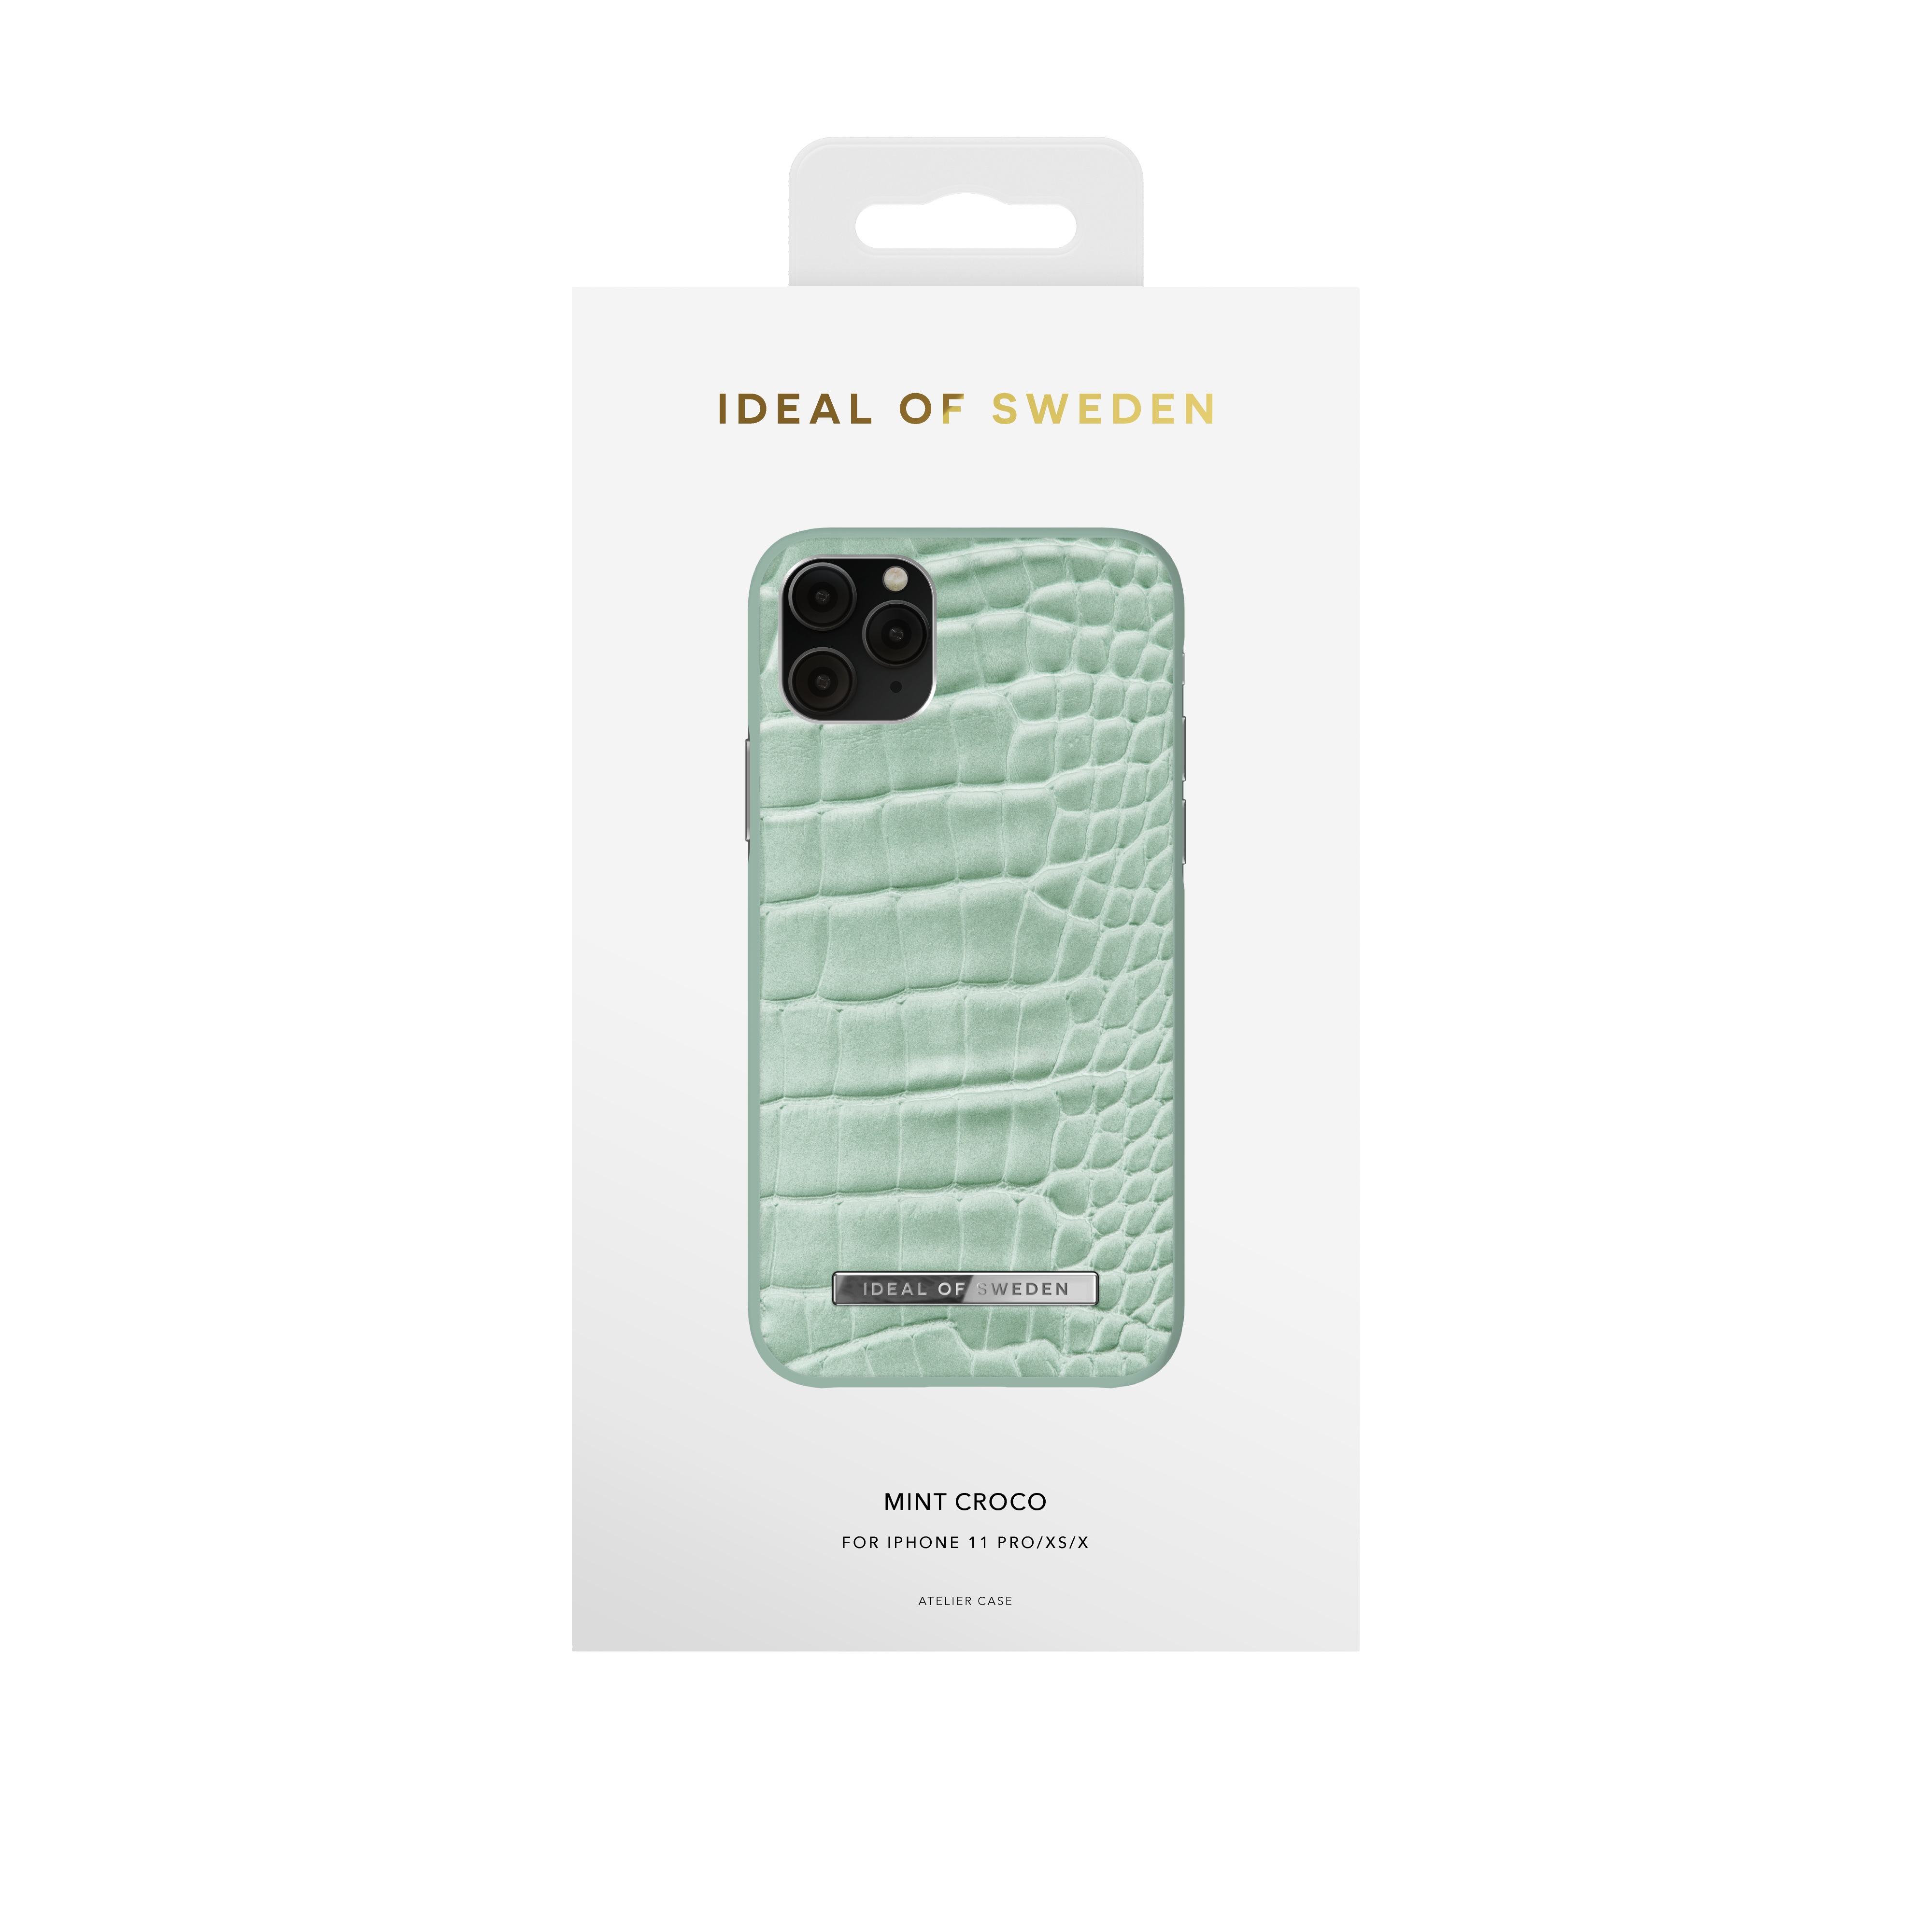 IDEAL OF Croco Pro, SWEDEN iPhone Mint X, iPhone IDACSS21-I1958-261, Backcover, XS, Apple, 11 iPhone